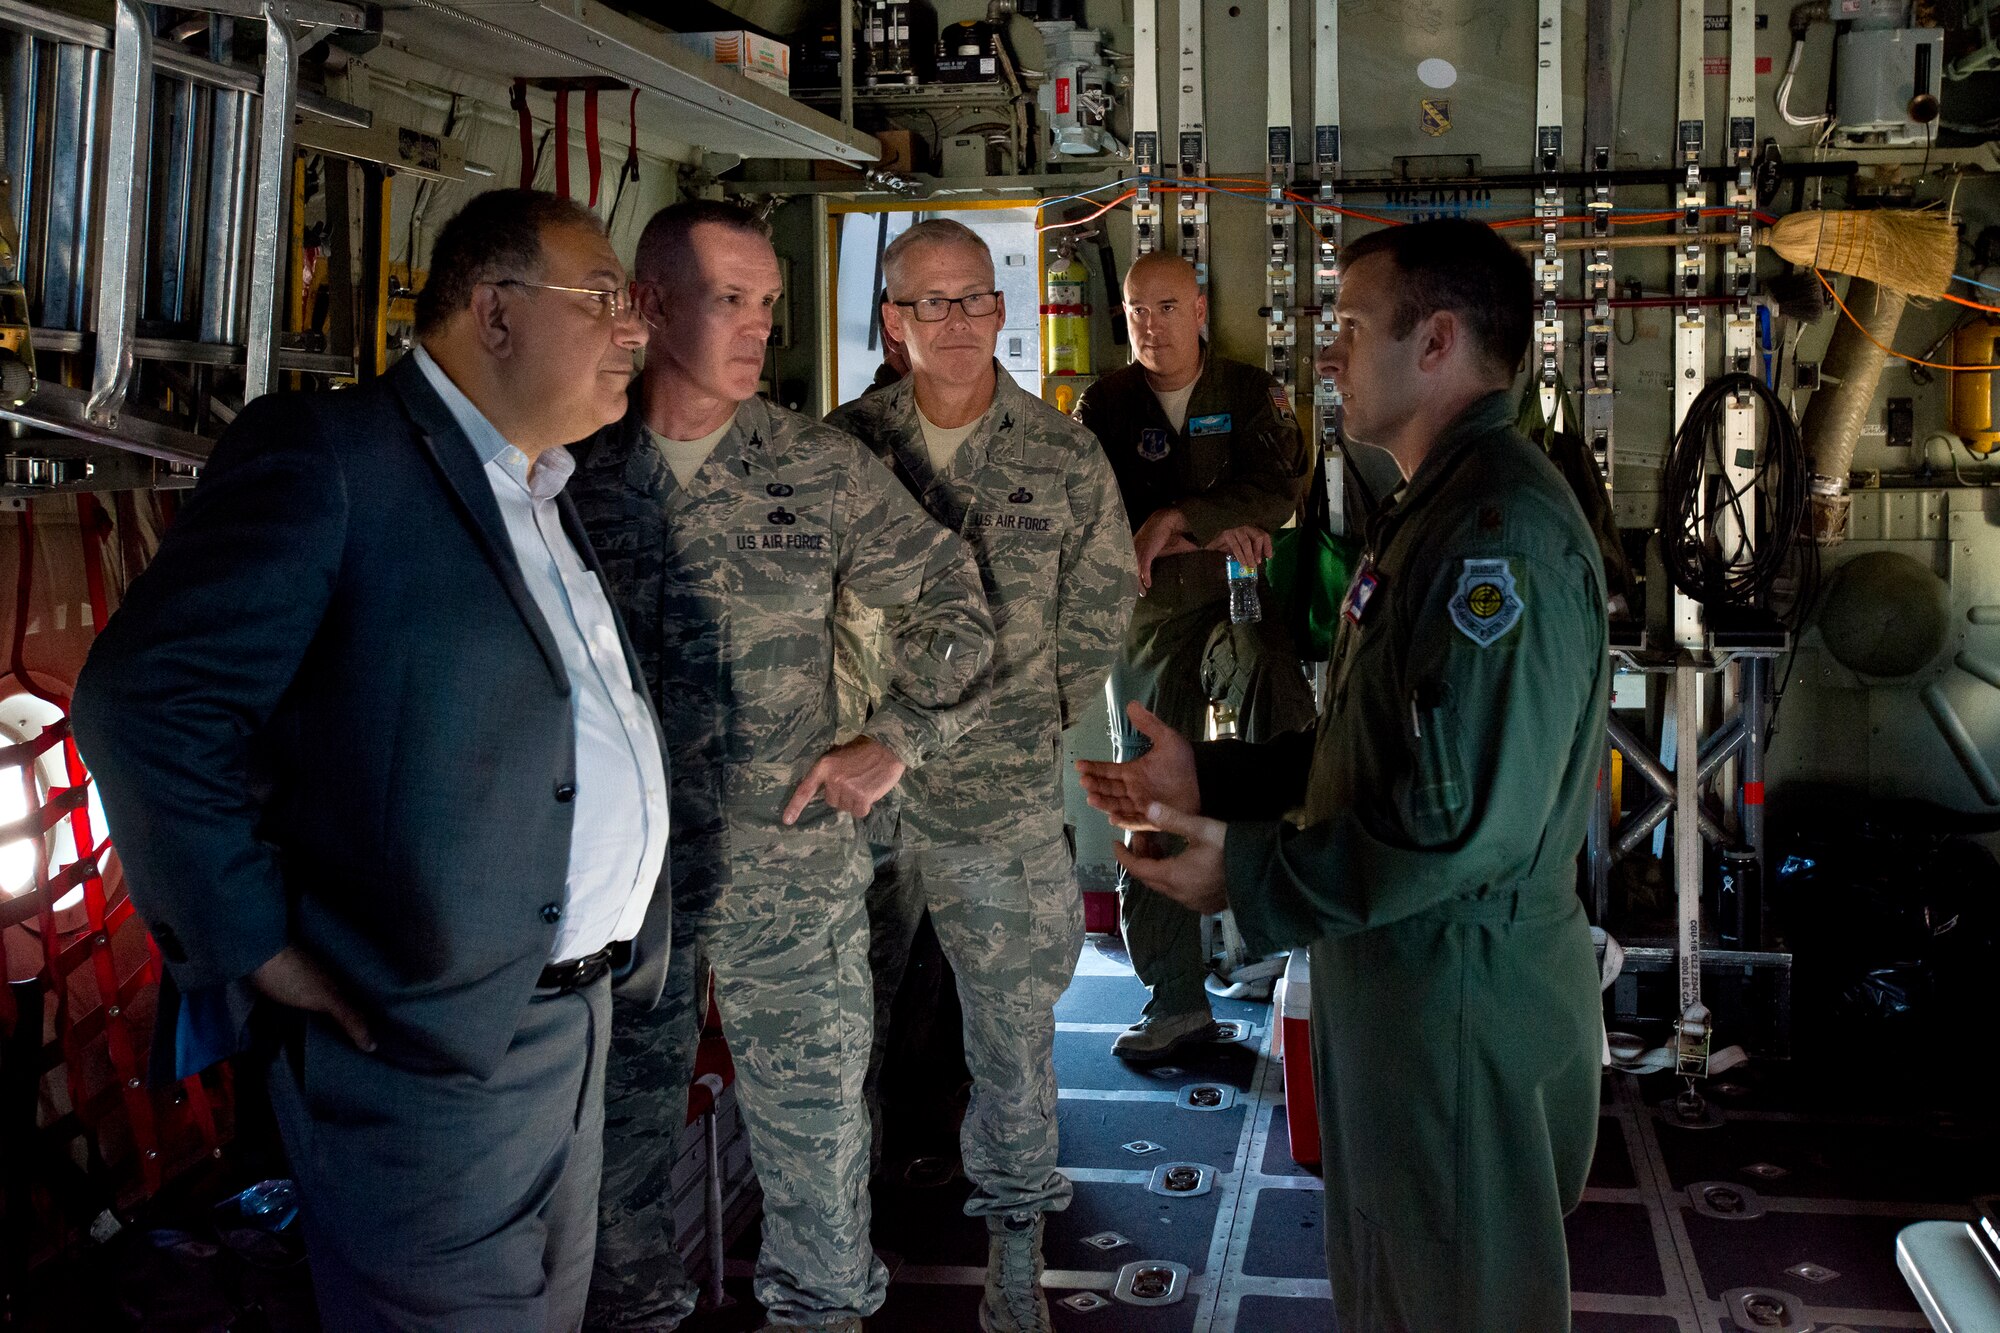 Maj. Justin Brumley, with the Air National Guard Air Force Reserve Command Test Center, informs ANG and AFRC leaders about the progress of various programs in testing for C-130H Hercules aircraft at the ANG AFRC Test Center at Tucson, Arizona, October 20, 2016. The test center is evaluating using the Rolls-Royce T56 Series 3.5 engine across the Guard's legacy C-130H fleet. (U.S. Air National Guard photo by Staff Sgt. John E. Hillier)